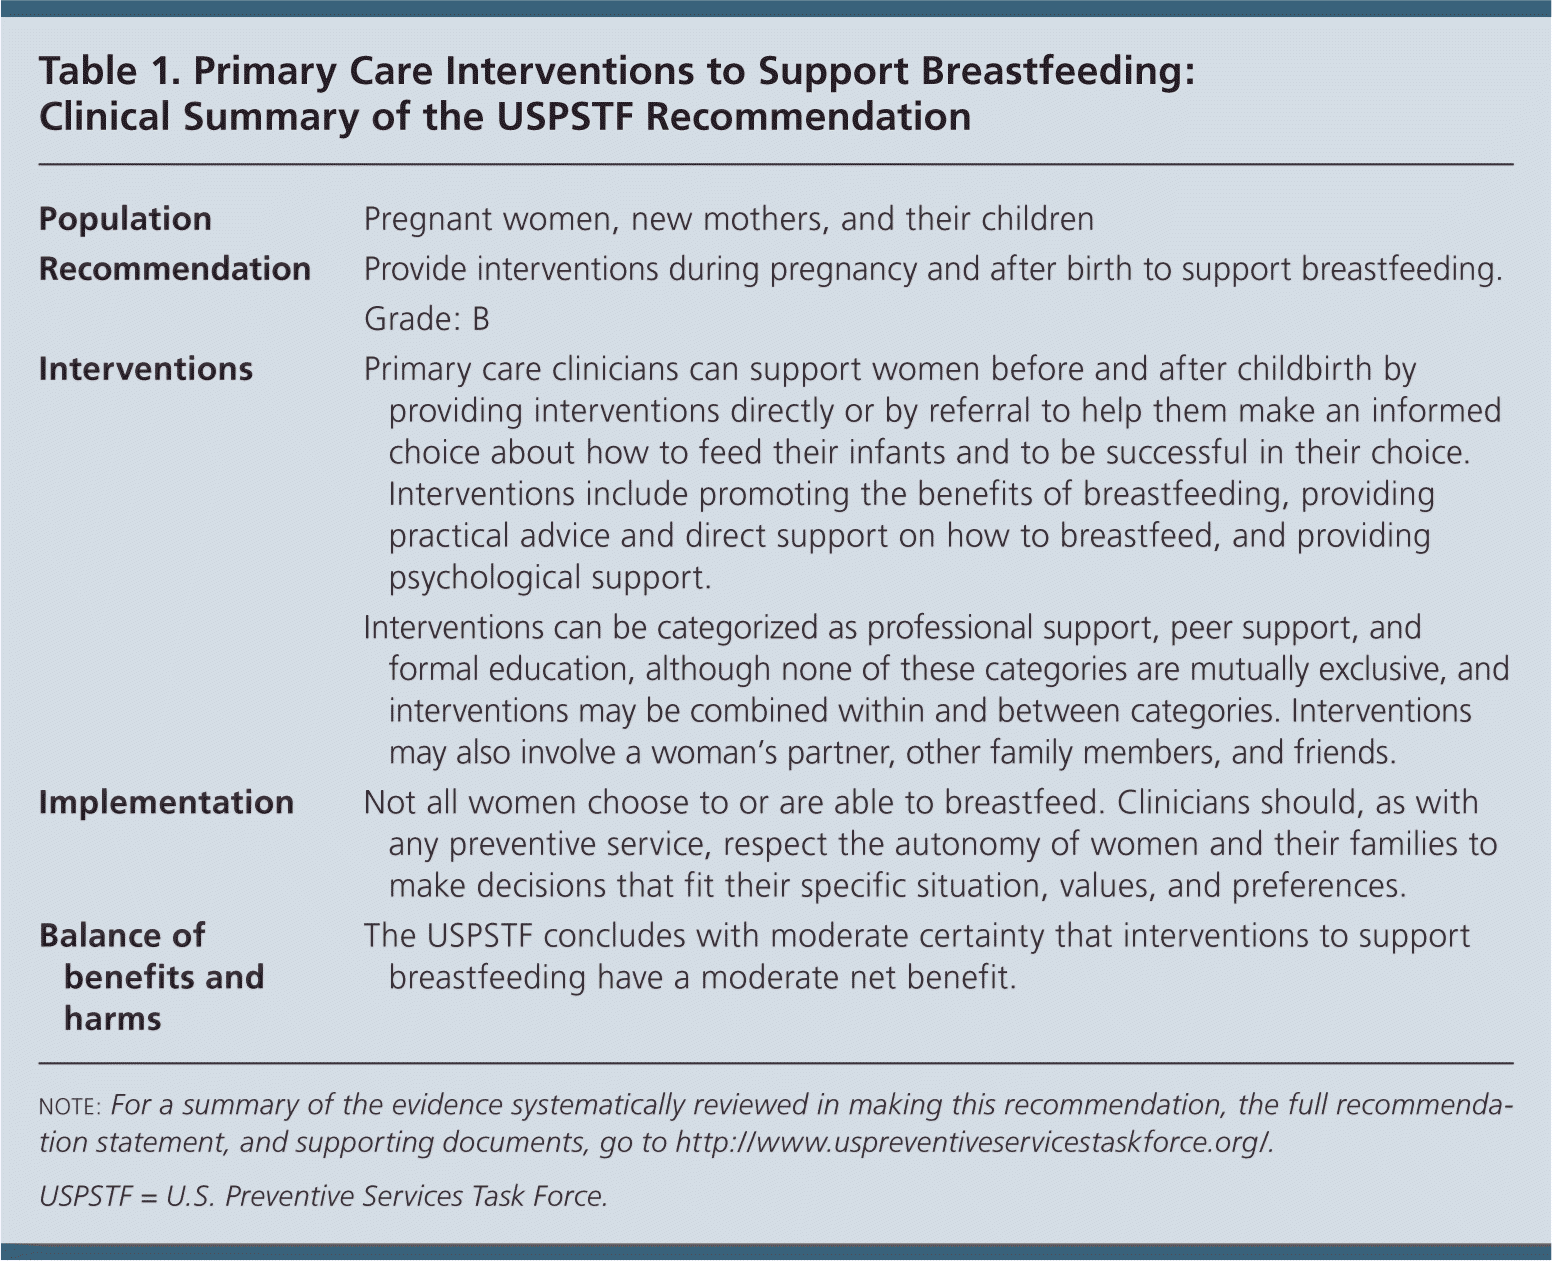 Breastfeeding: Benefits, Considerations, How to, Supplies